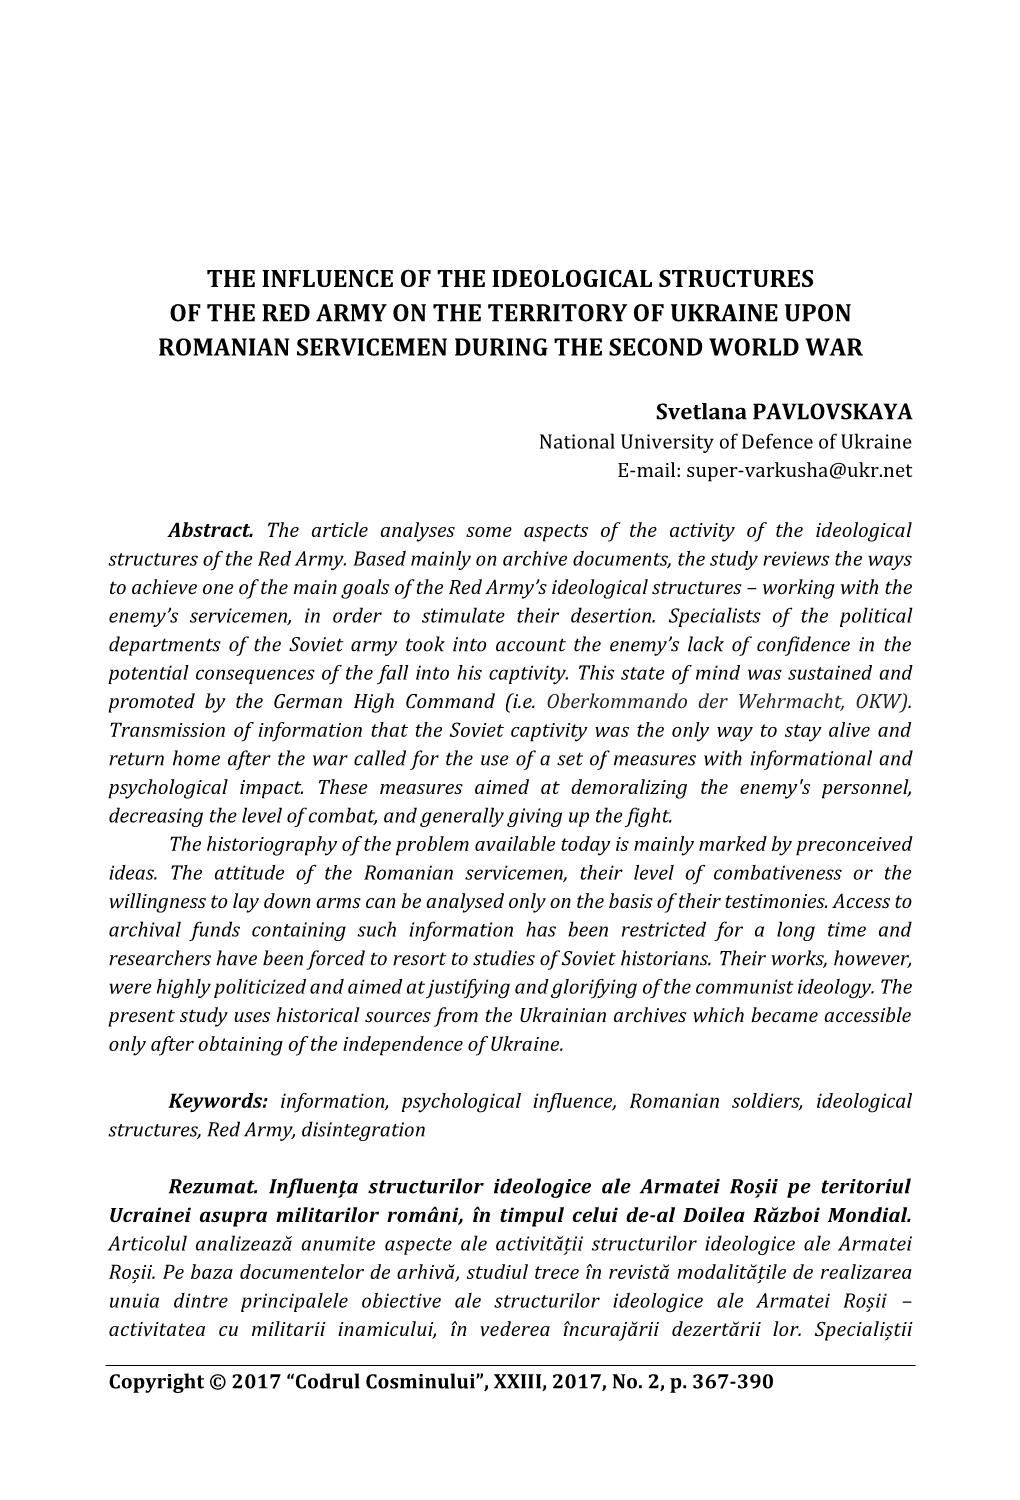 The Influence of the Ideological Structures of the Red Army on the Territory of Ukraine Upon Romanian Servicemen During the Second World War